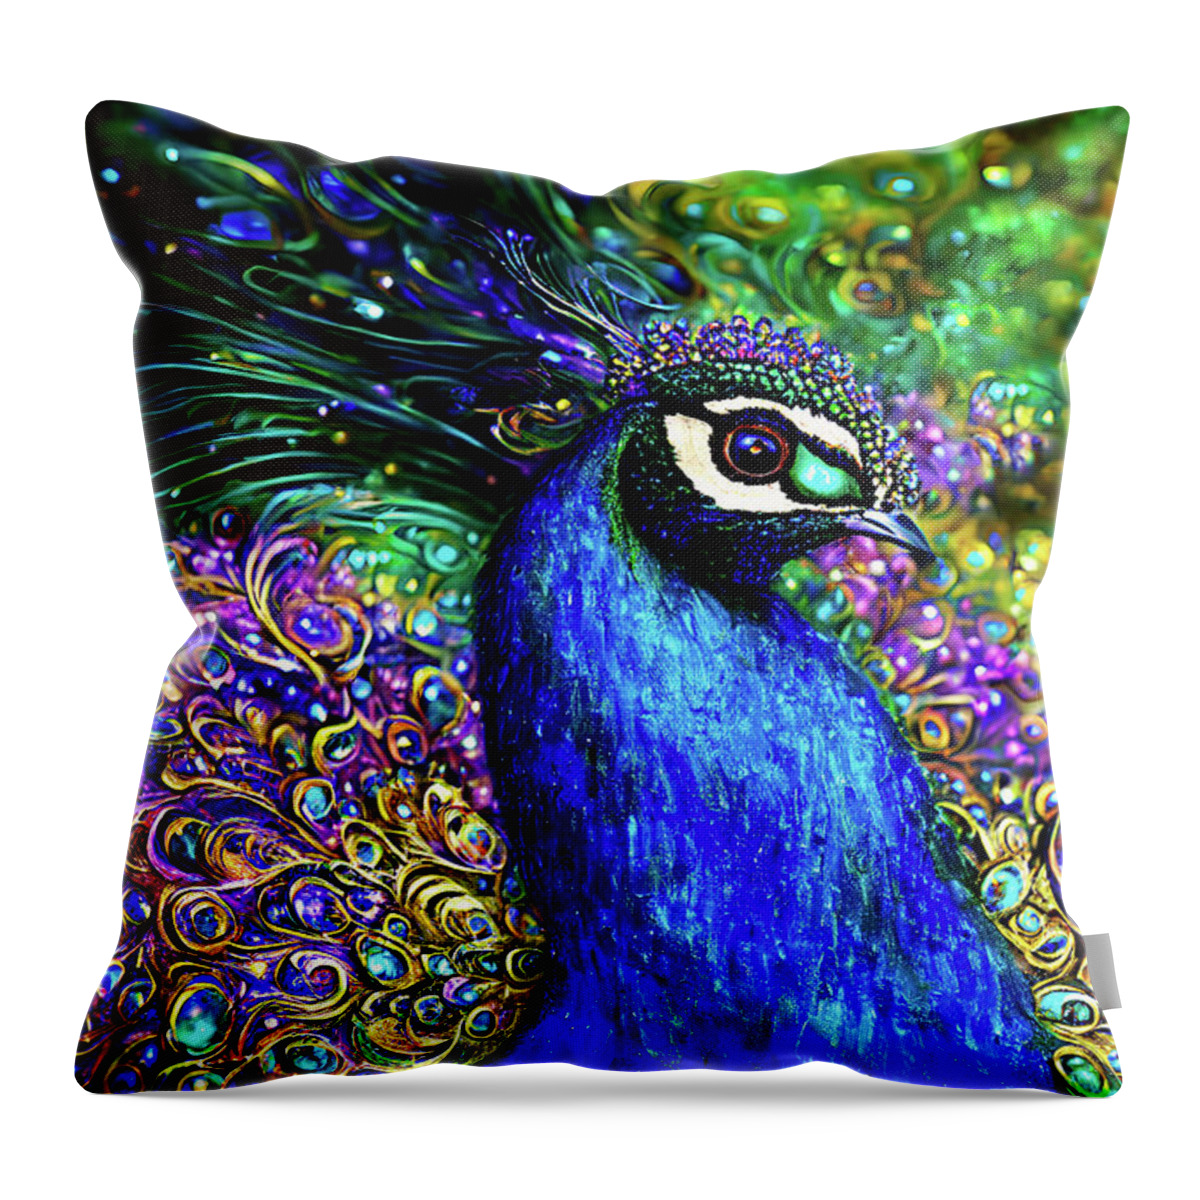 Peacocks Throw Pillow featuring the digital art Dazzling Peacock by Peggy Collins